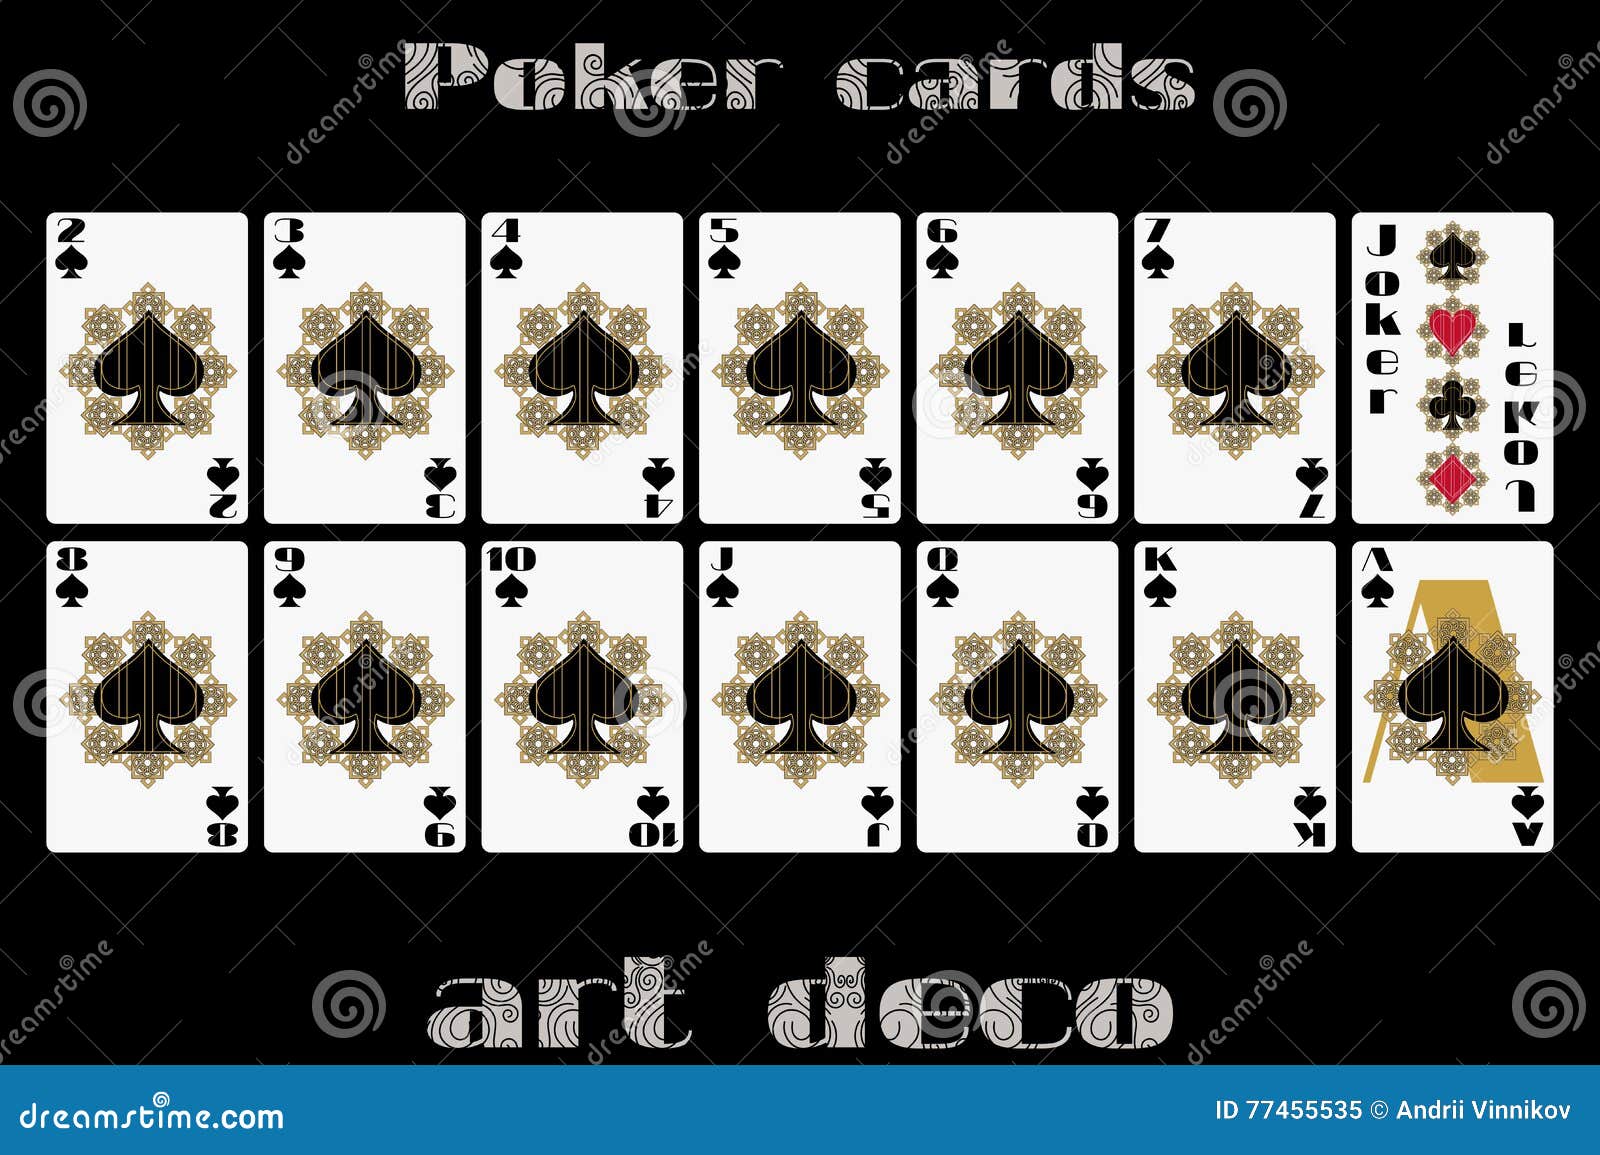 Poker Cards Order - Poker Cards Types & Suits